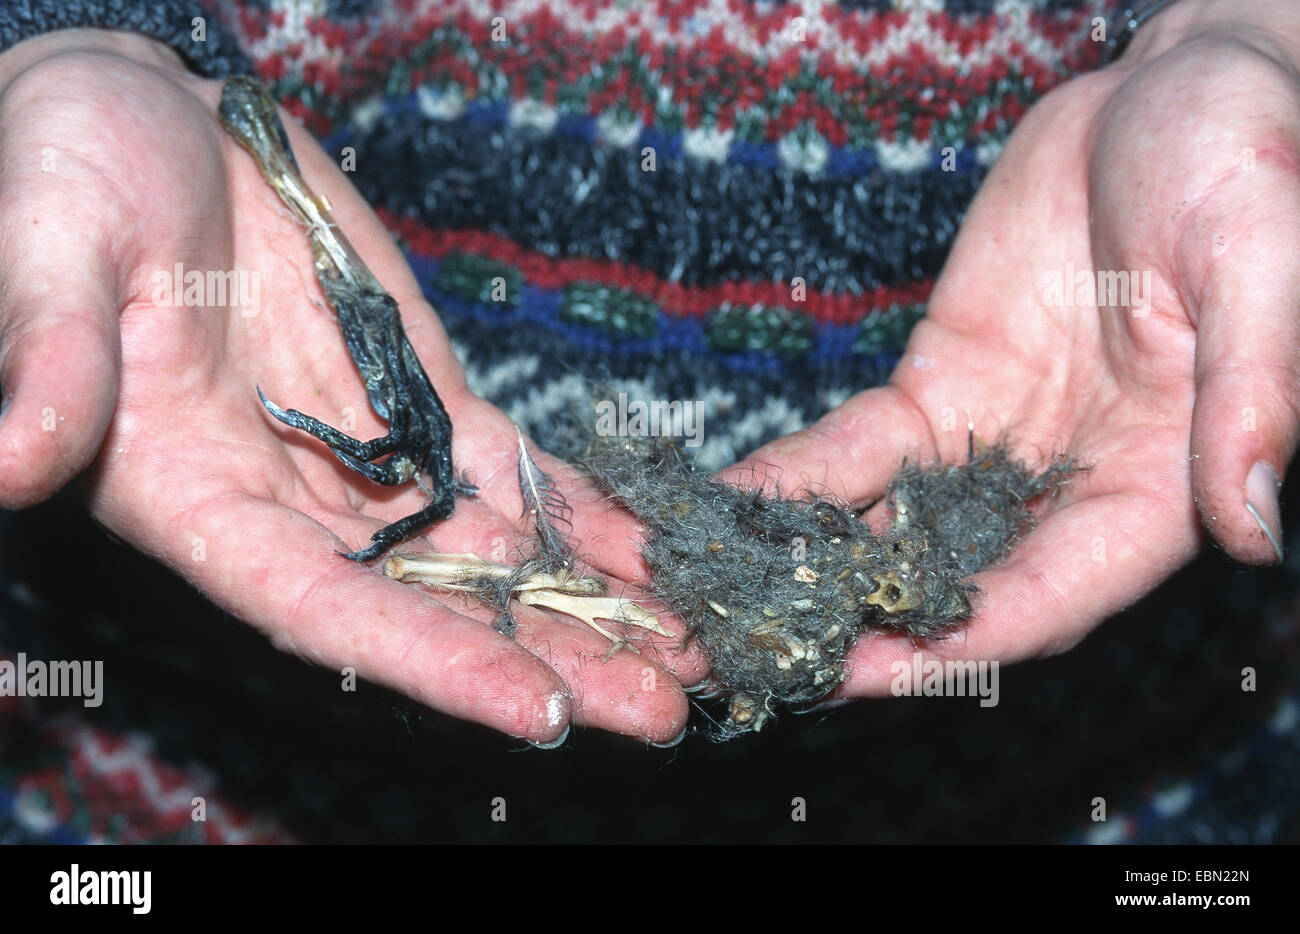 northern eagle owl (Bubo bubo), cast of a northern eagle owl, remains of food (foot of a coow) and cast on human hands Stock Photo